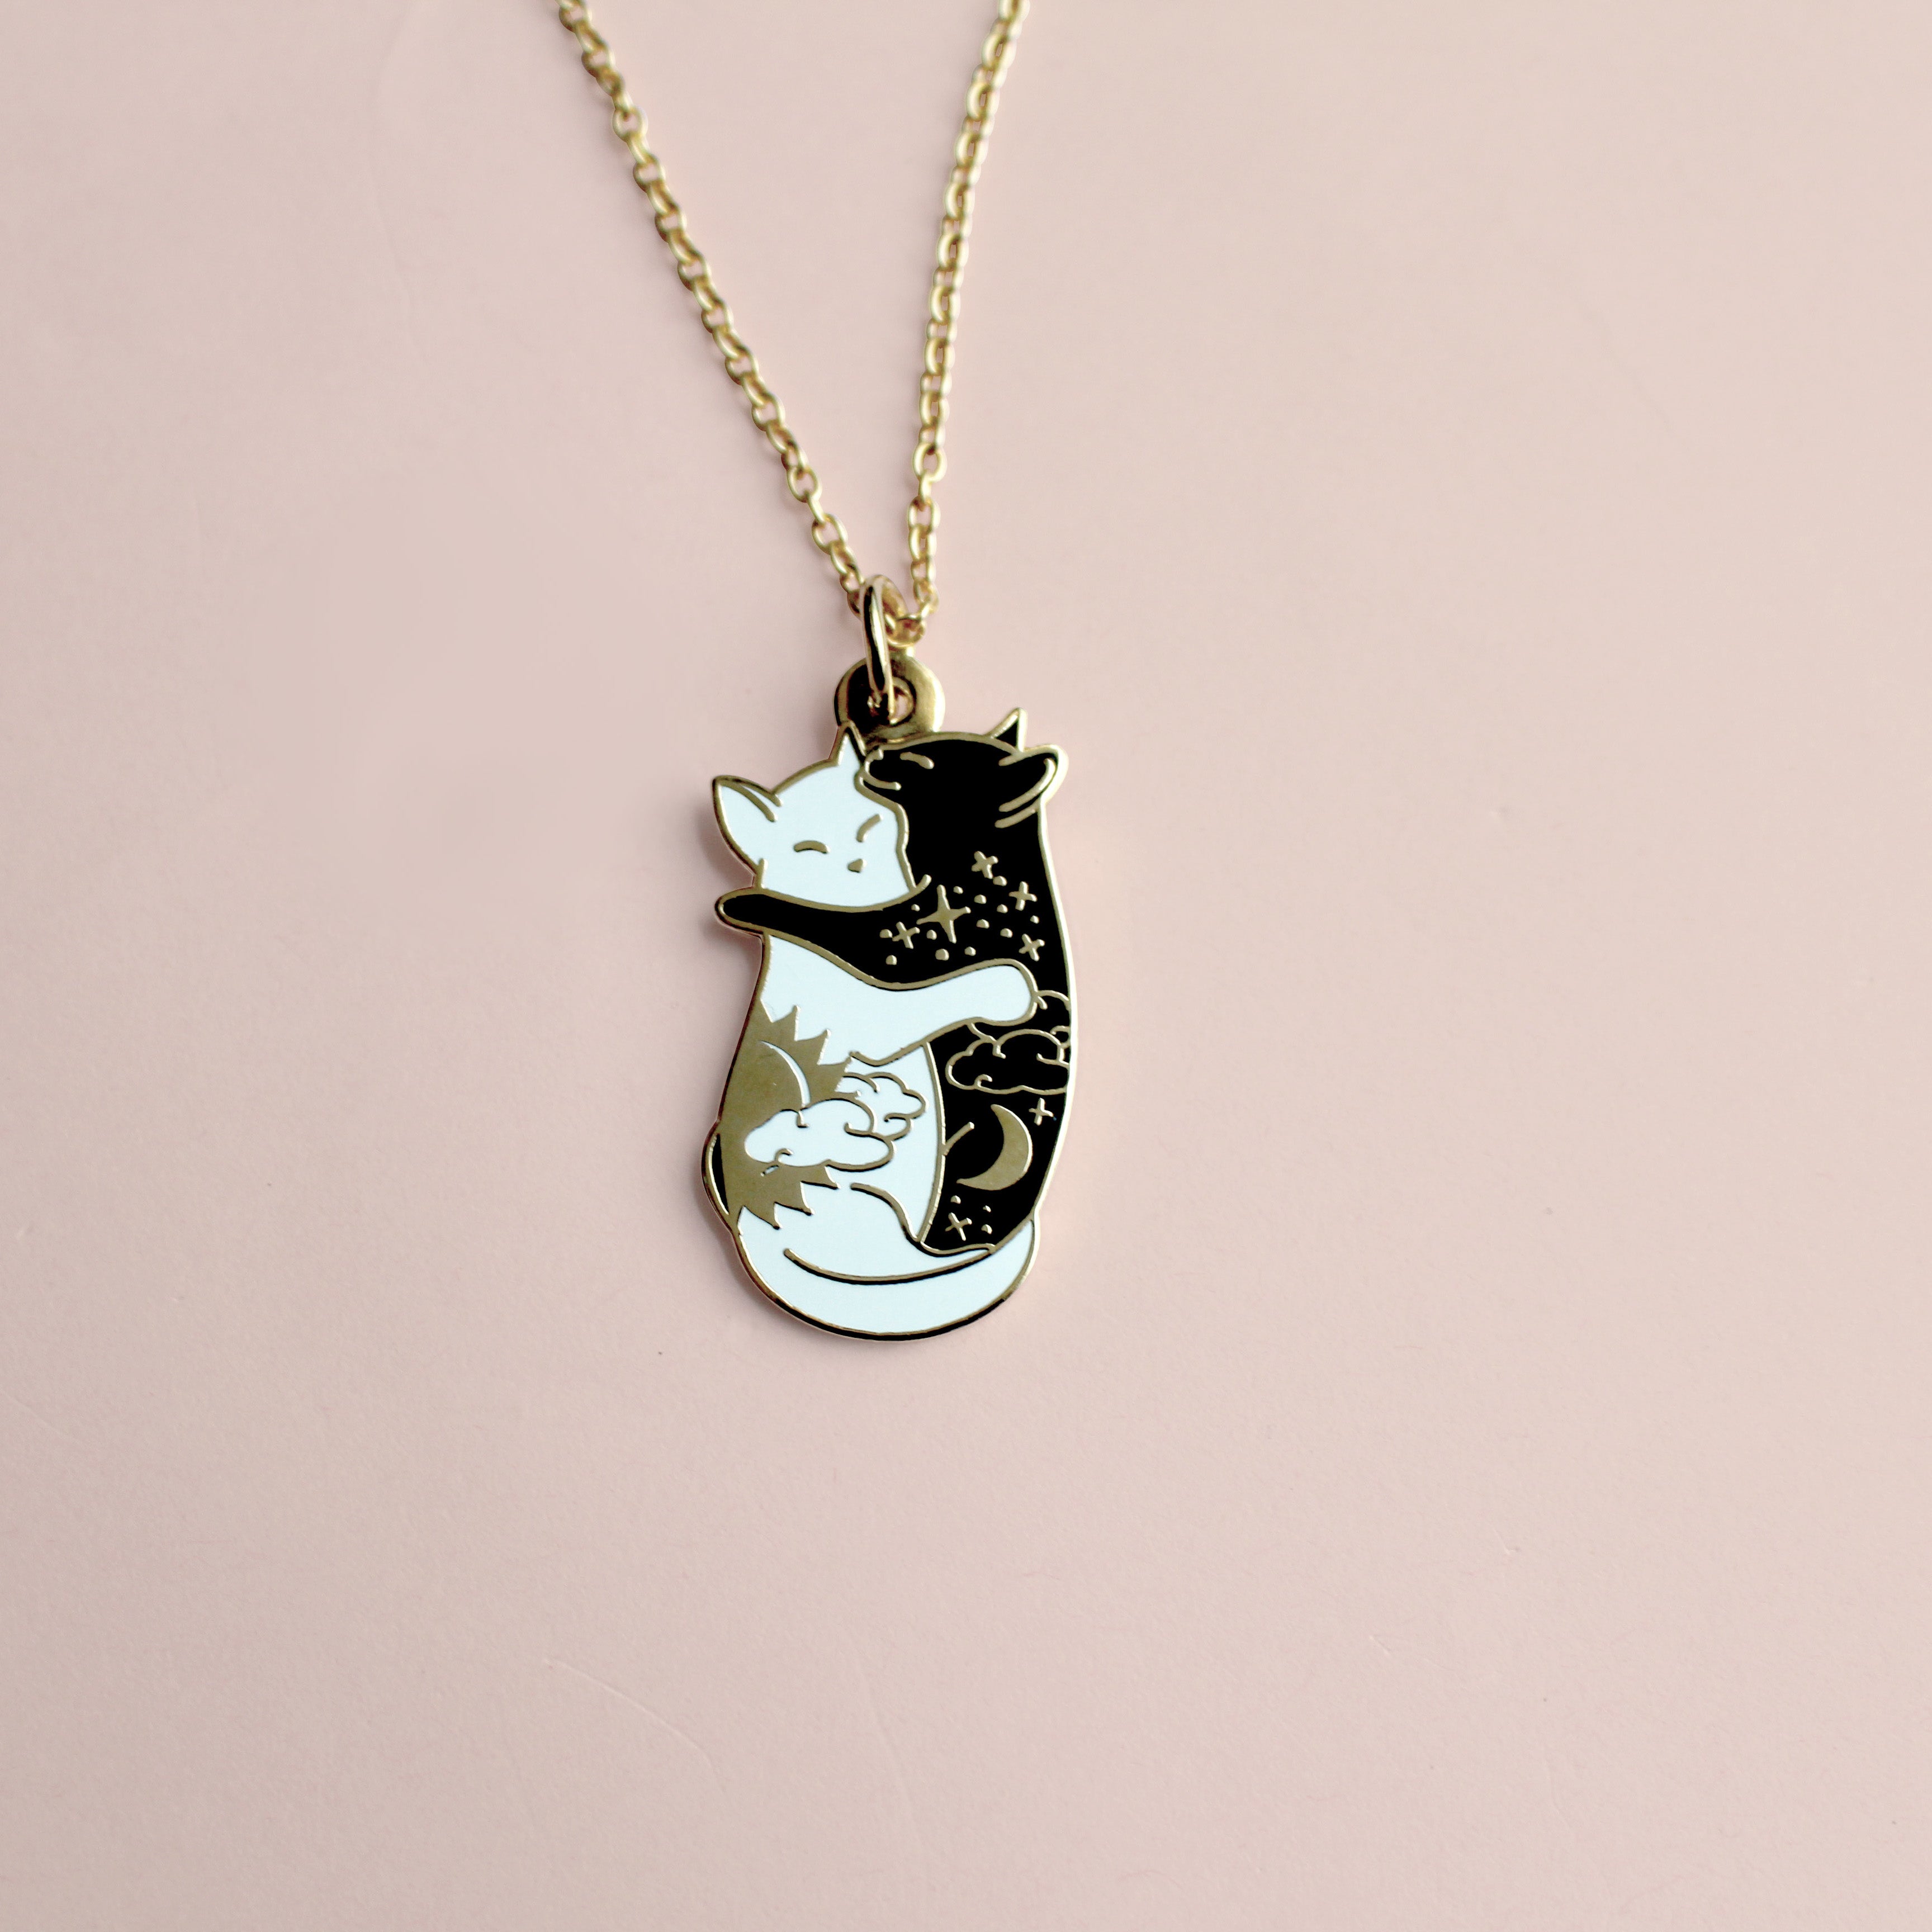 Celestial Cat Necklace, Cat In Moon Necklace Catching a Star – SilverfireUK